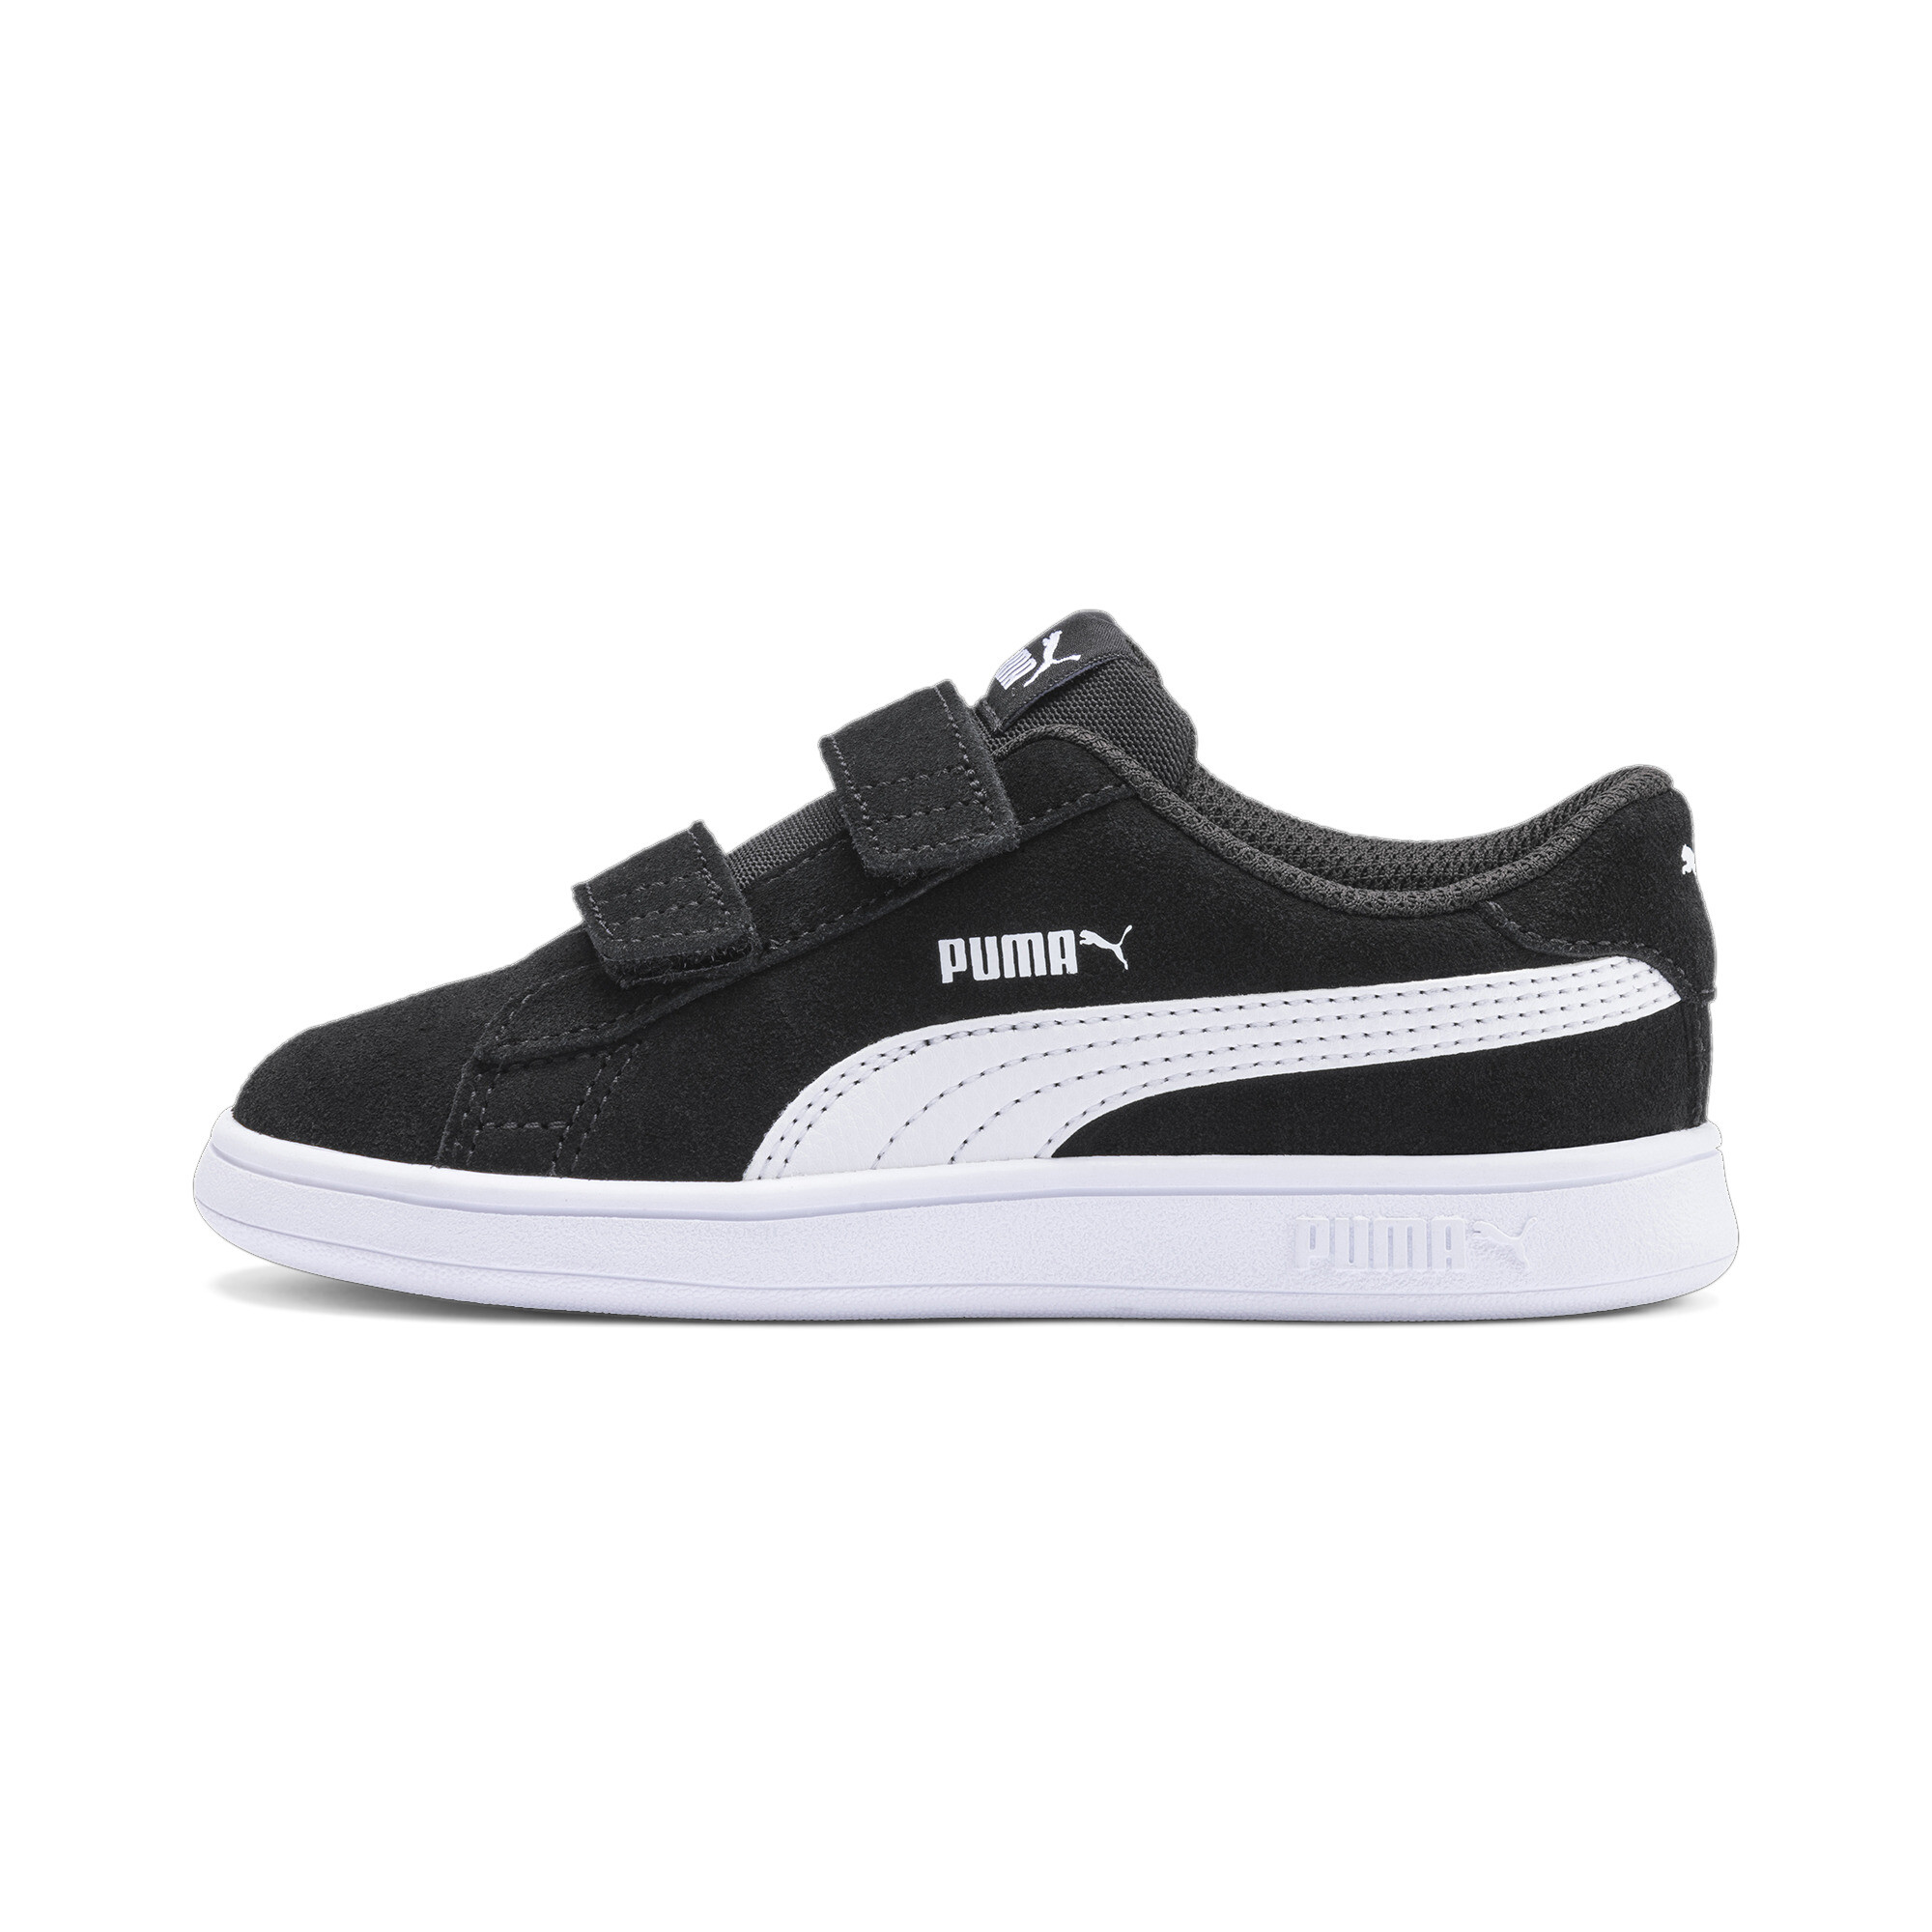 puma toddler shoes on sale